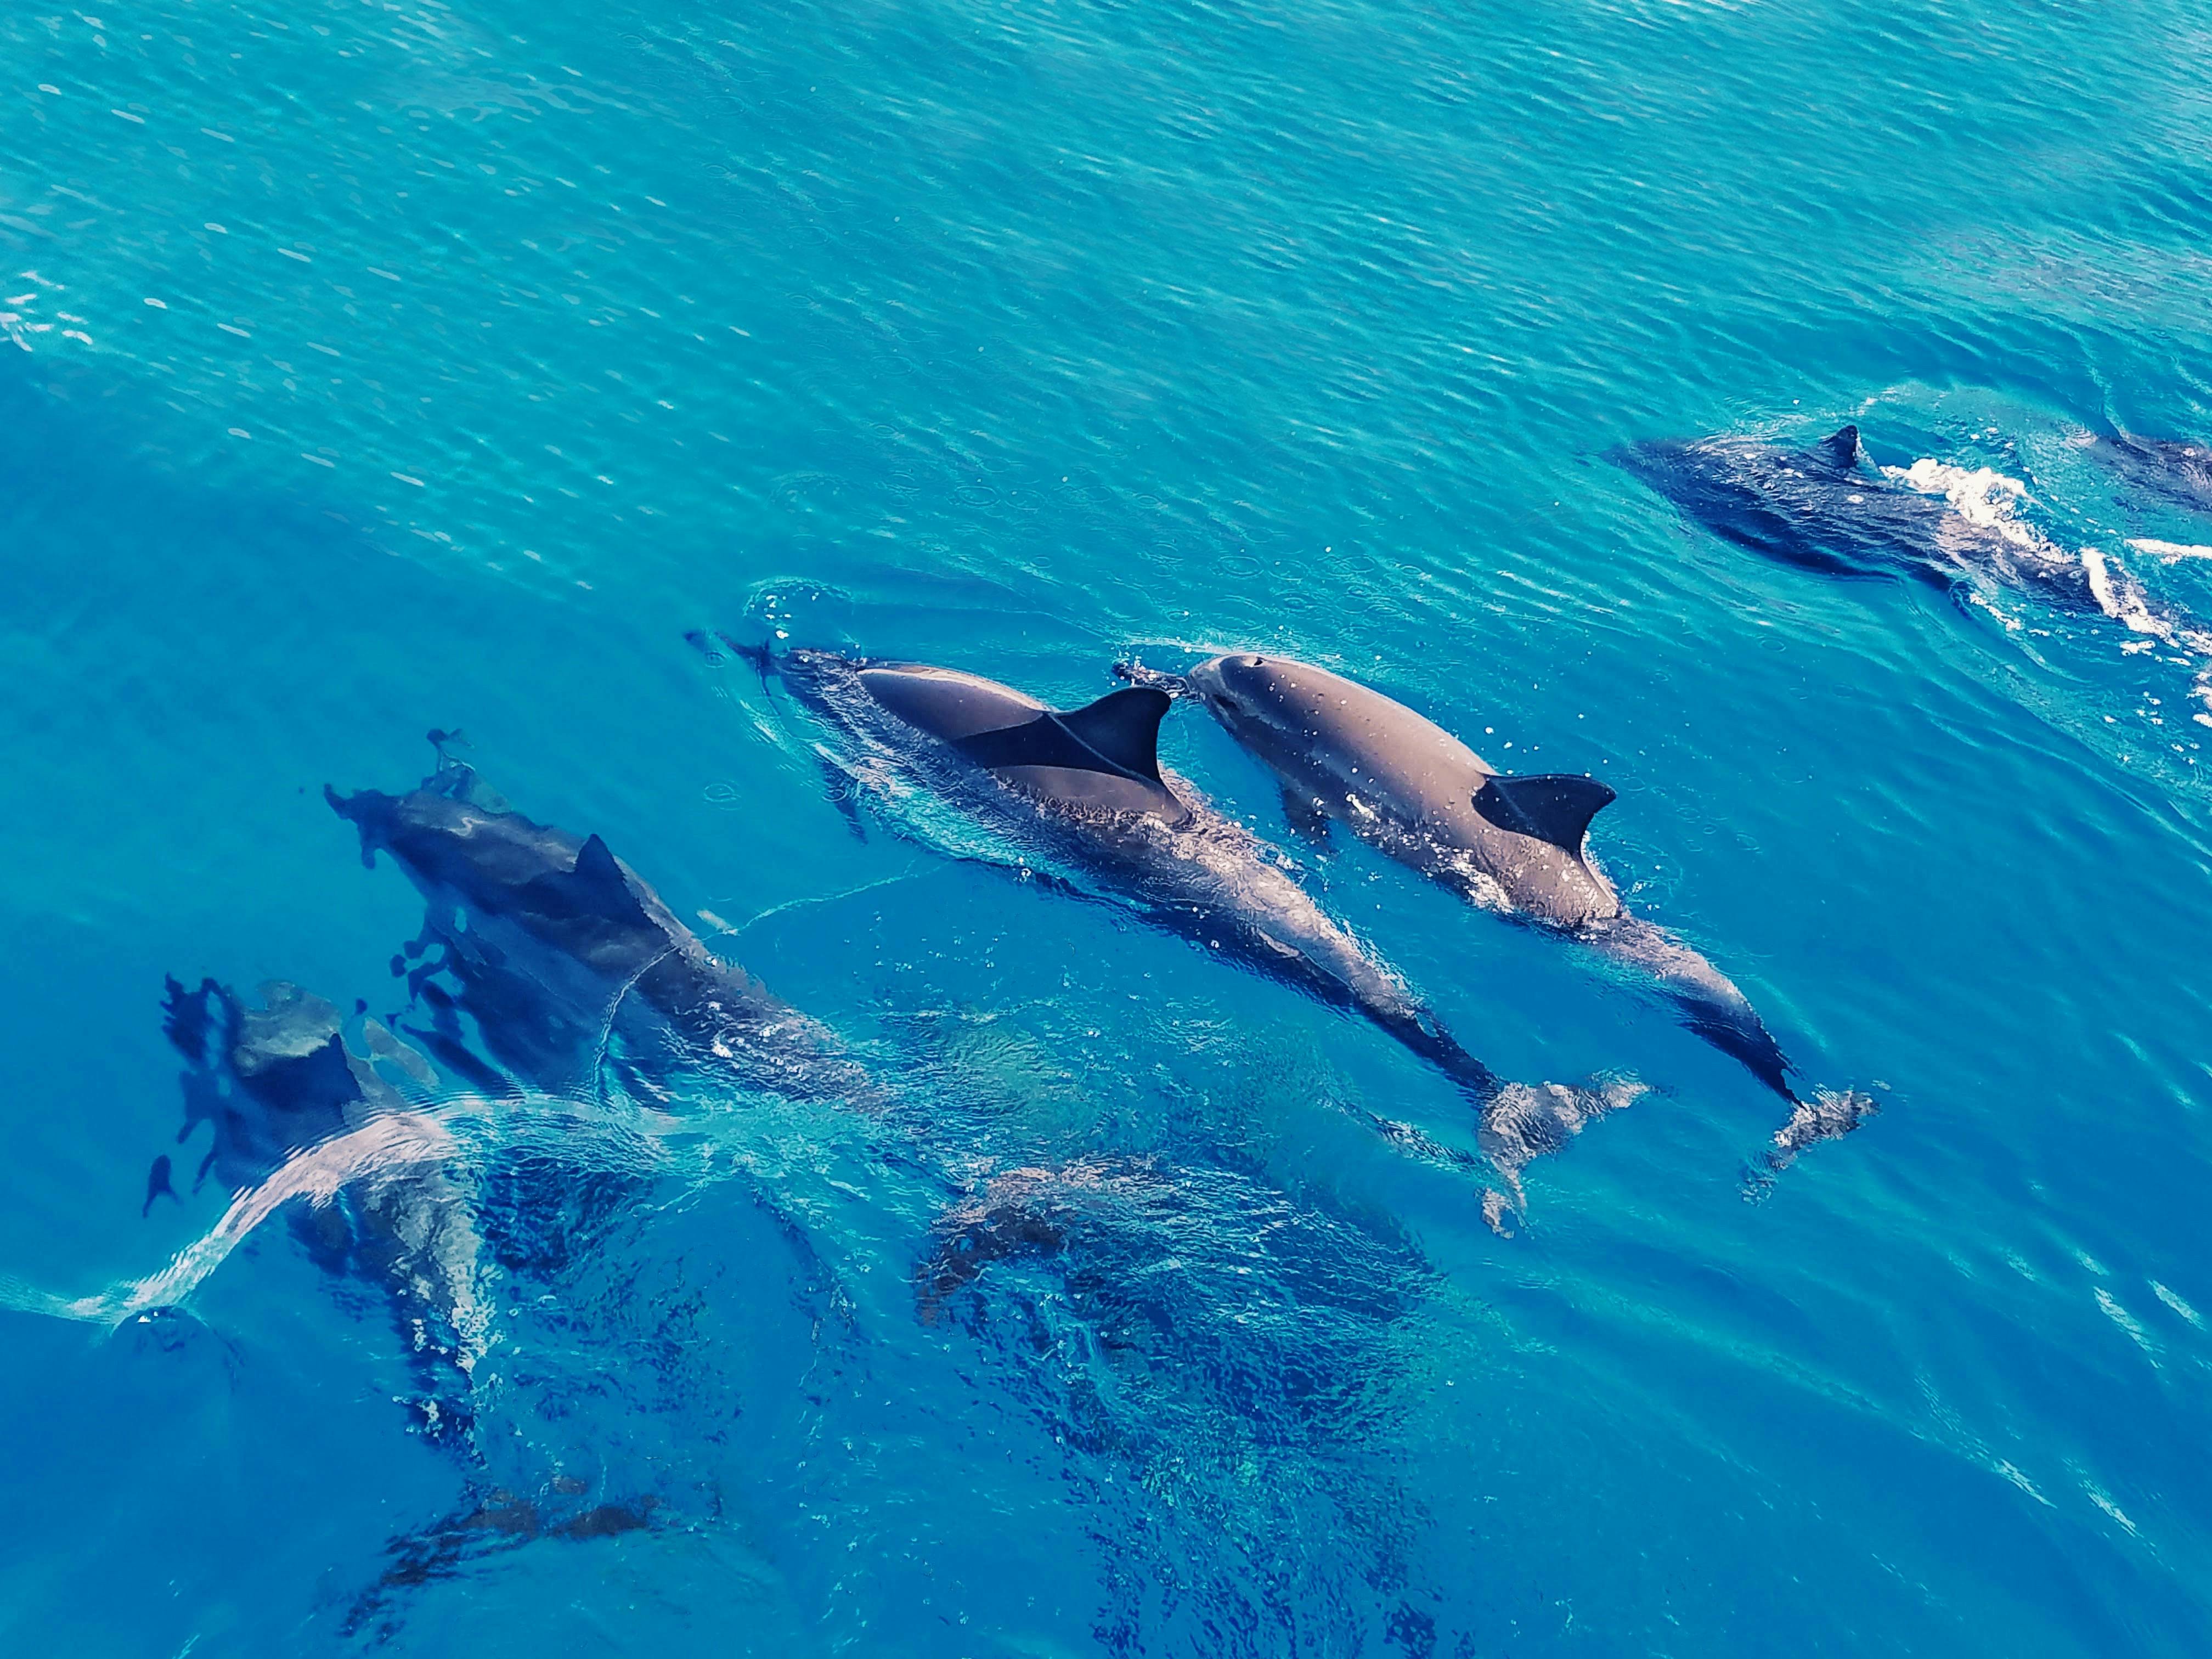 Wild dolphins swimming experience